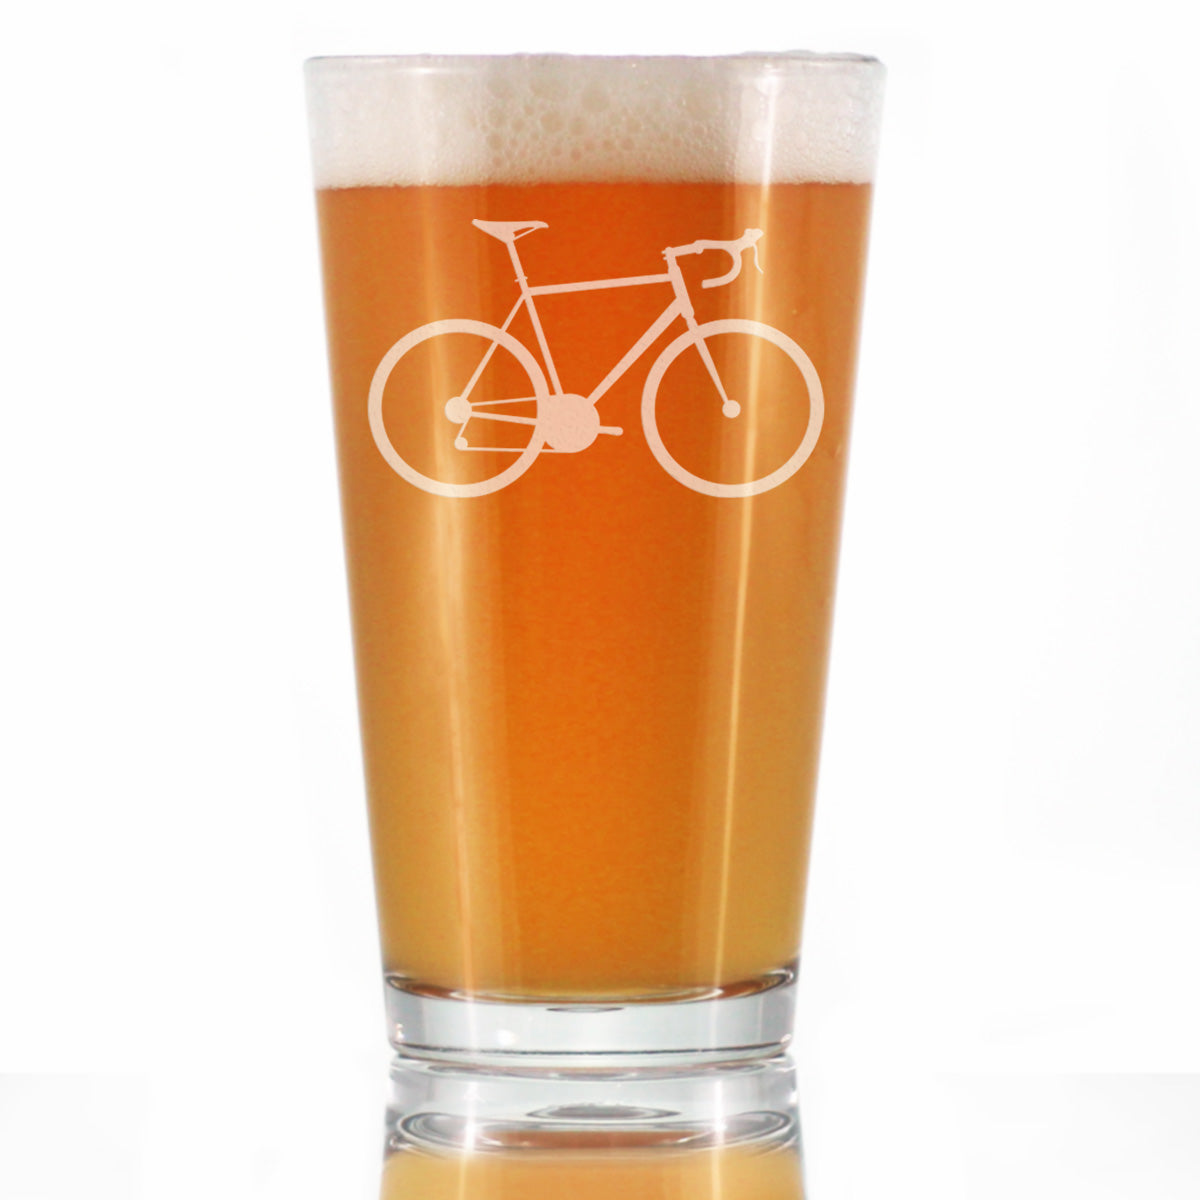 Bicycle - Pint Glass for Beer - Unique Road Biking Themed Decor and Gifts for Cyclists - 16 oz Glasses